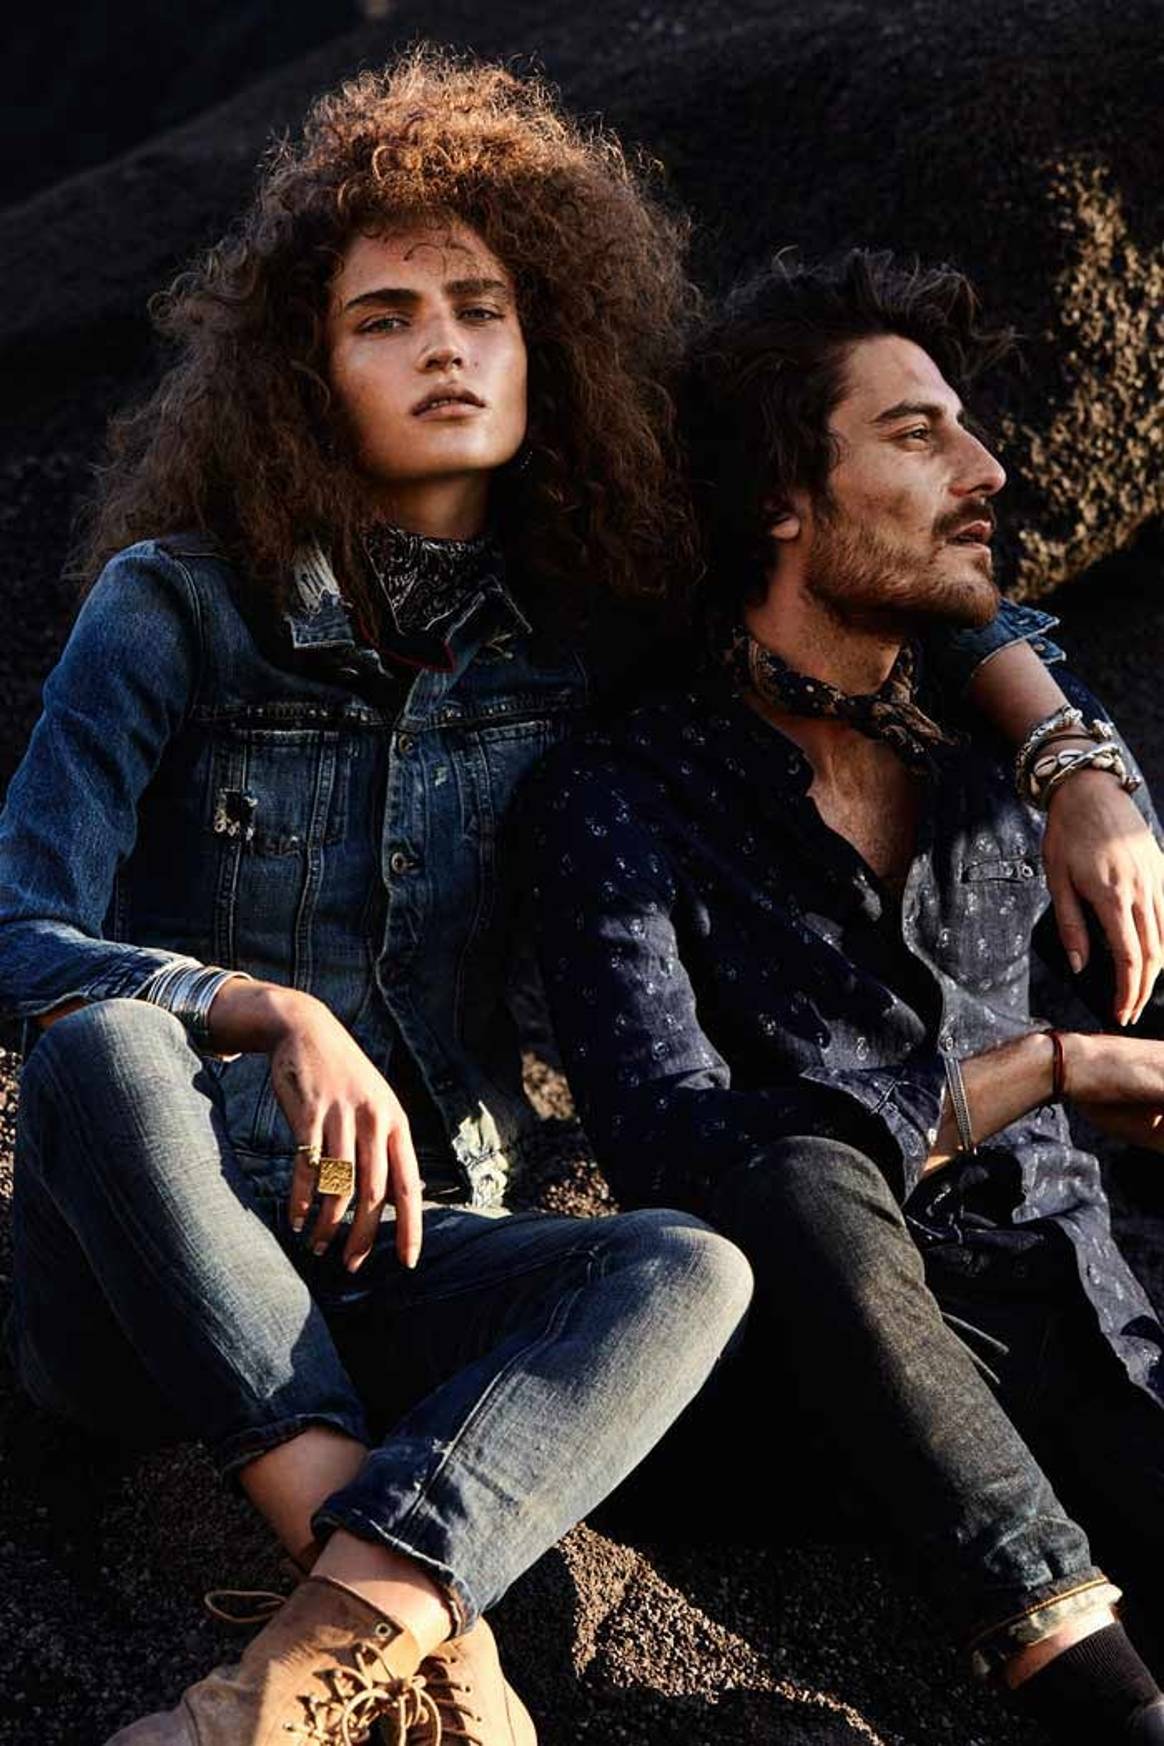 How do you tell the story of denim?